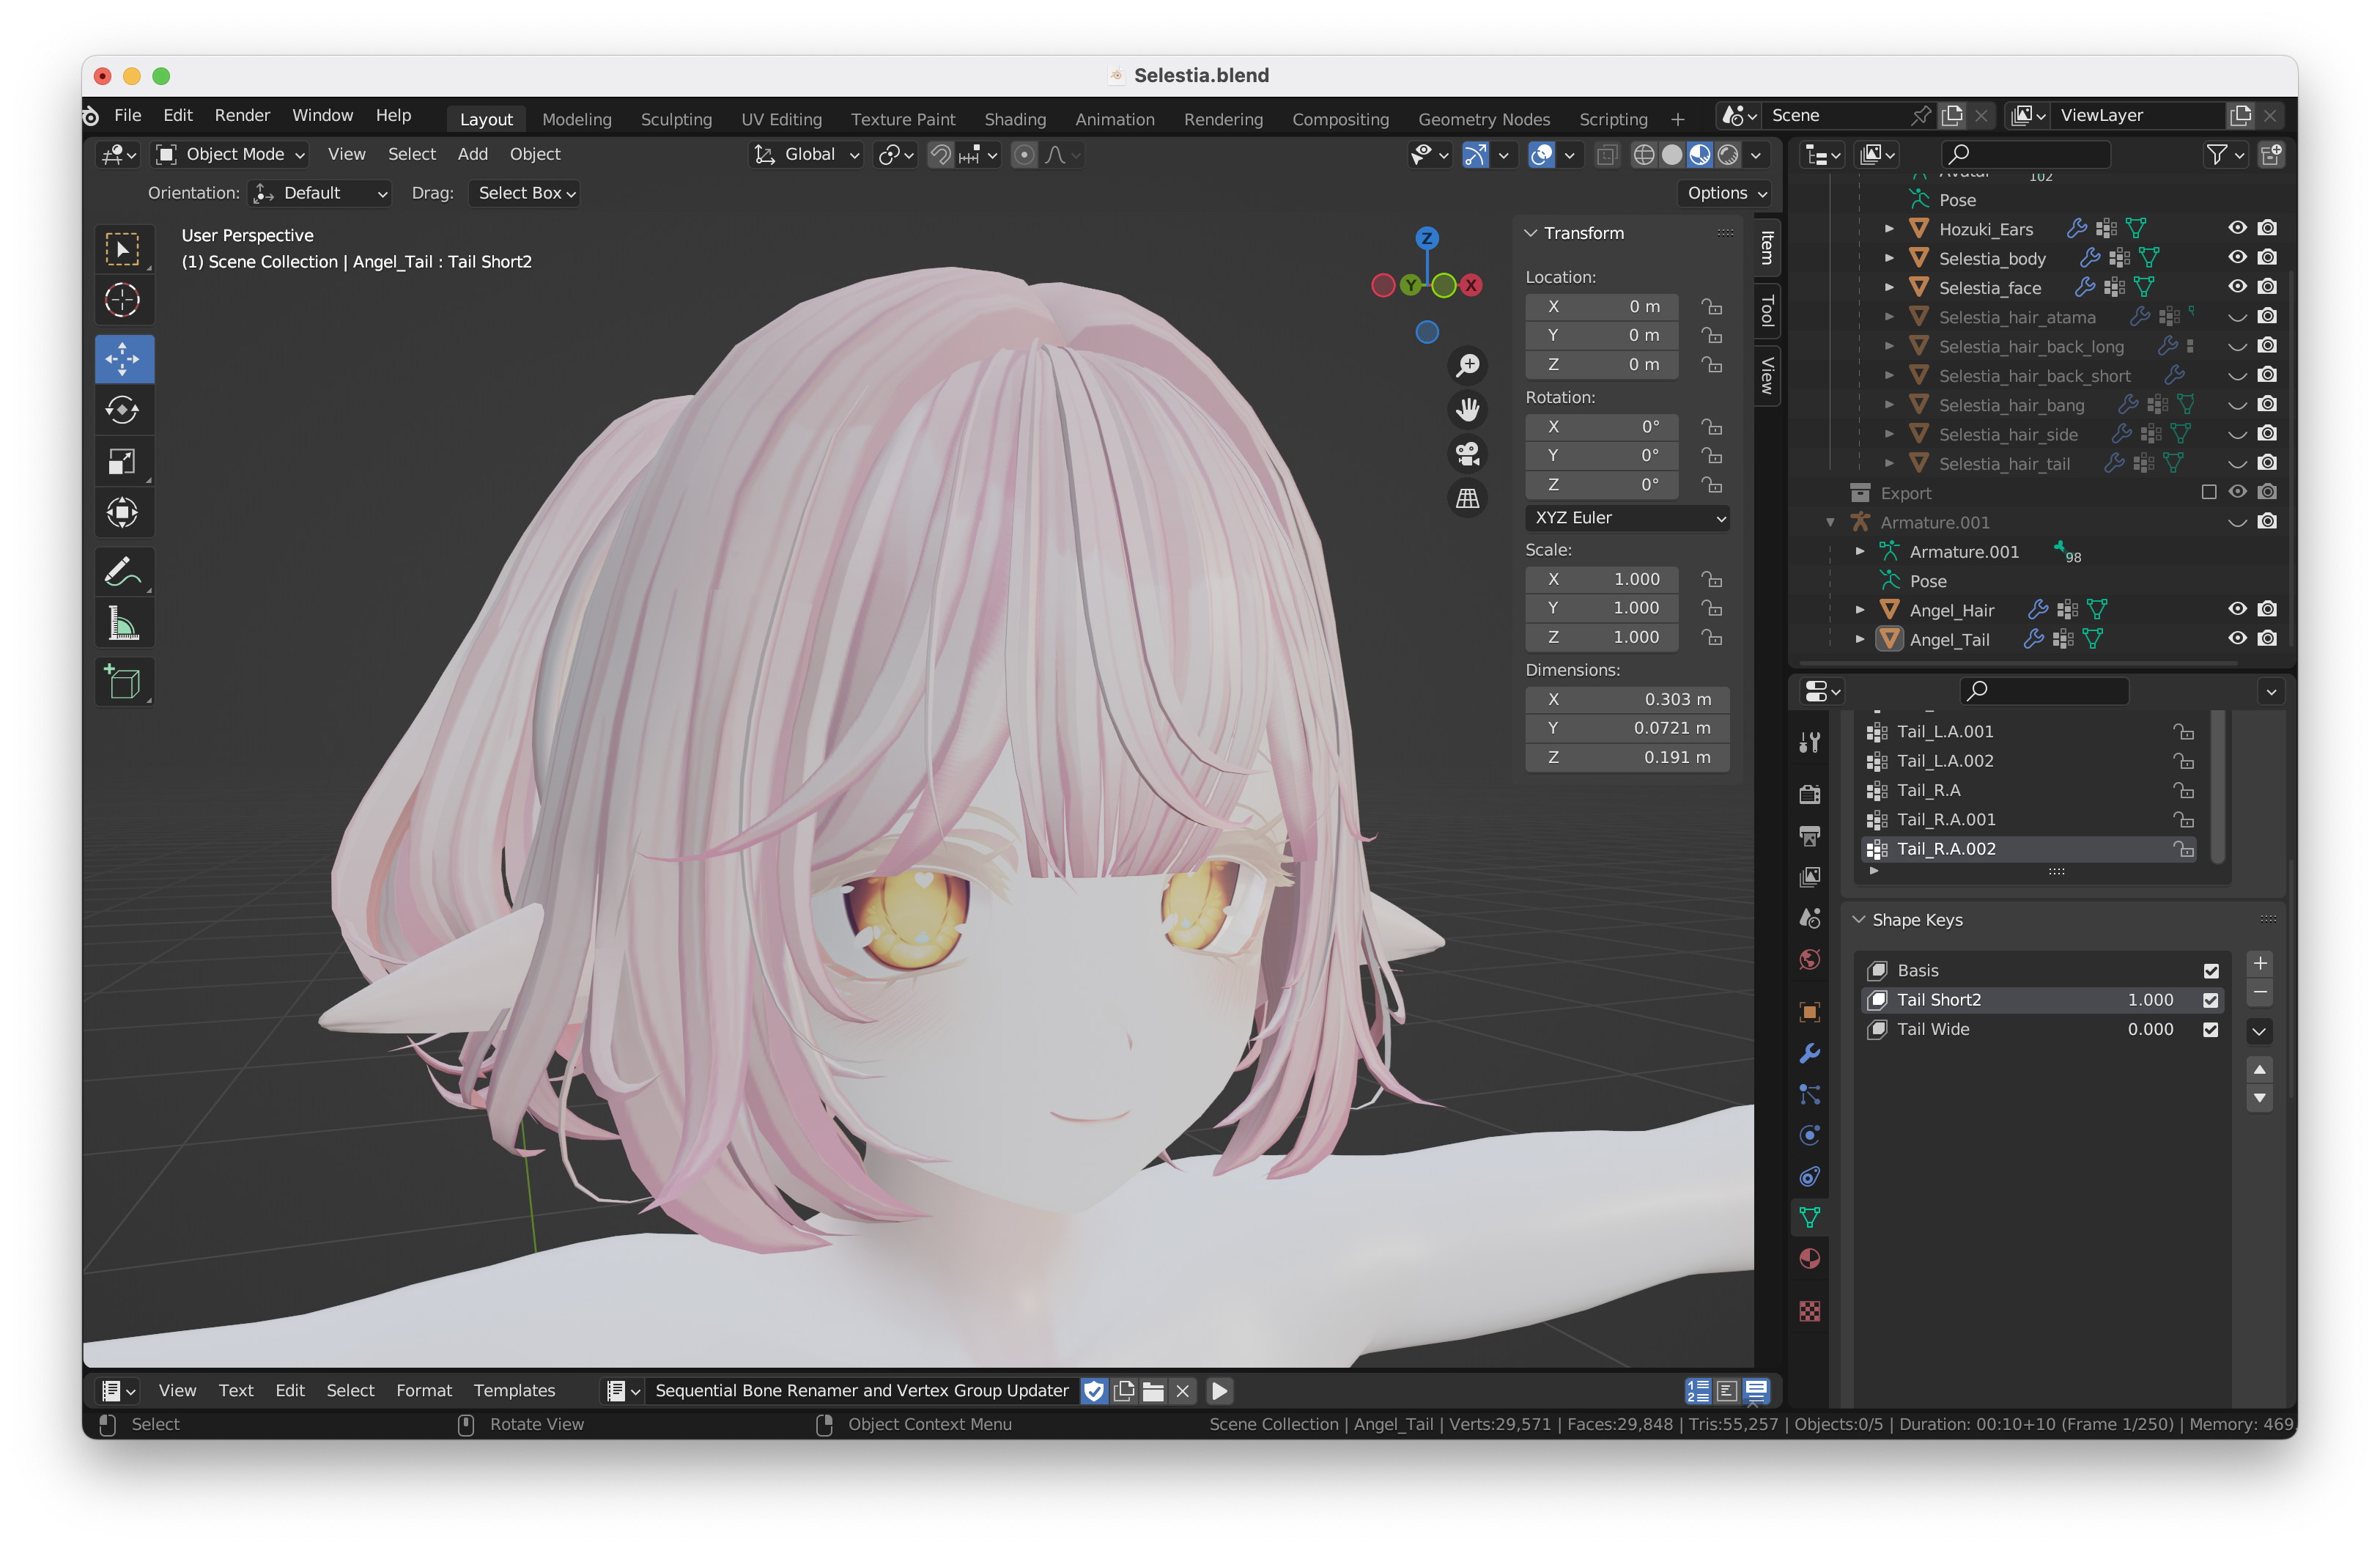 A screenshot of Blender showing my VRChat avatar. My long hair has been replaced with cute short hair! The hair has not been integrated with my avatar yet, and the scene statistics have lots of big numbers, so it’s clear that I’ve only loaded the hair in—there’s still more work to be done before I can actually upload this to VRChat!